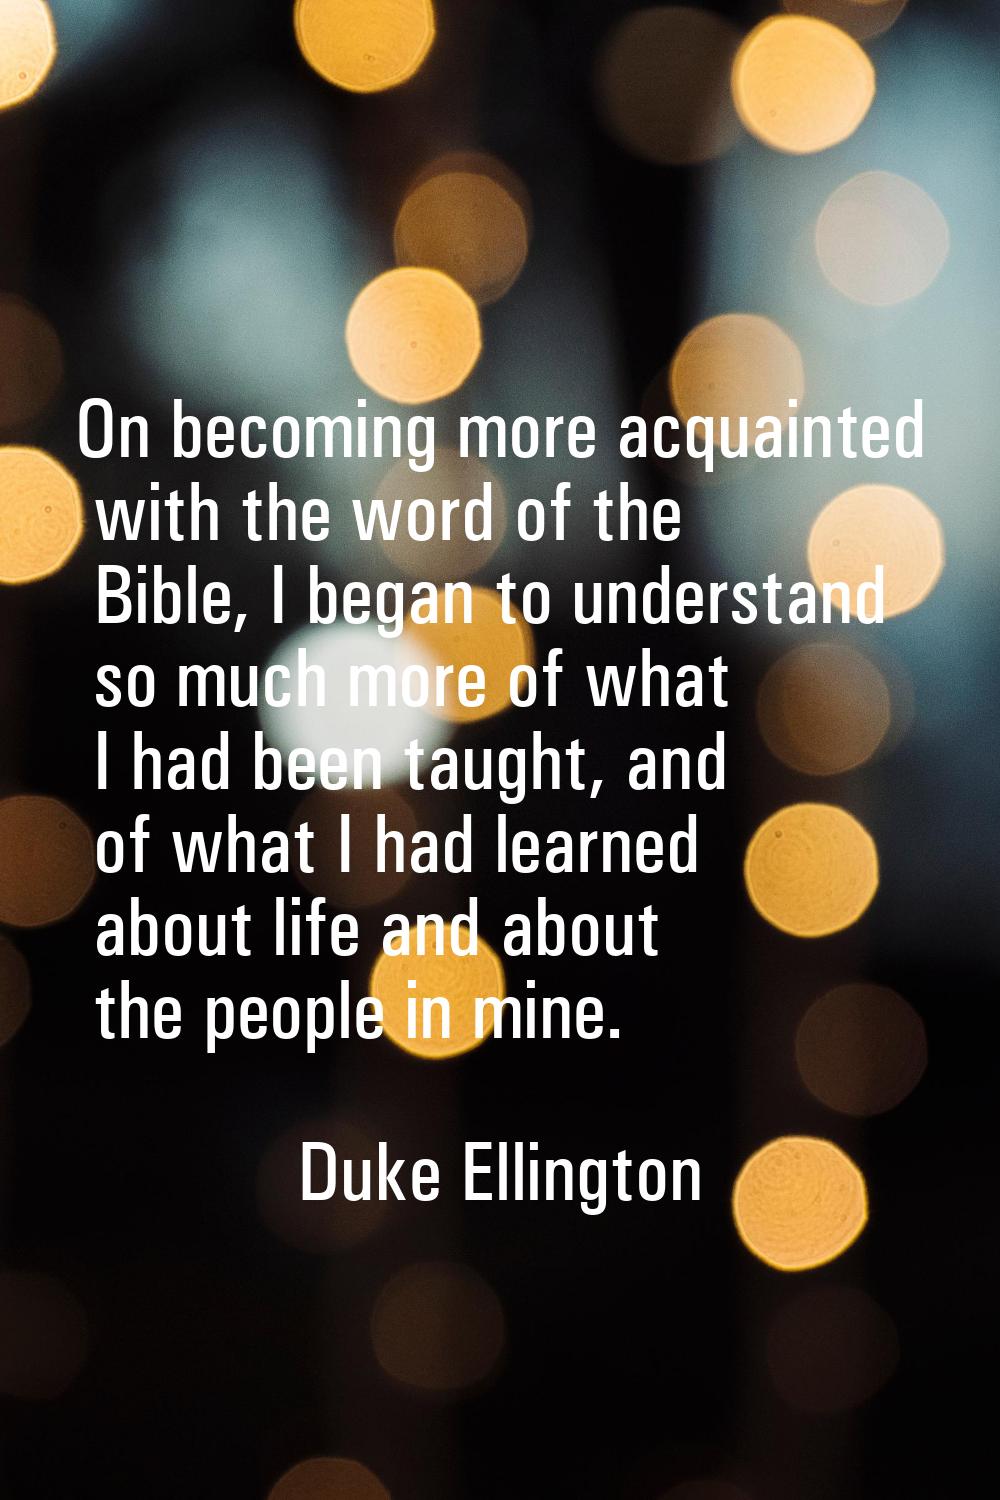 On becoming more acquainted with the word of the Bible, I began to understand so much more of what 